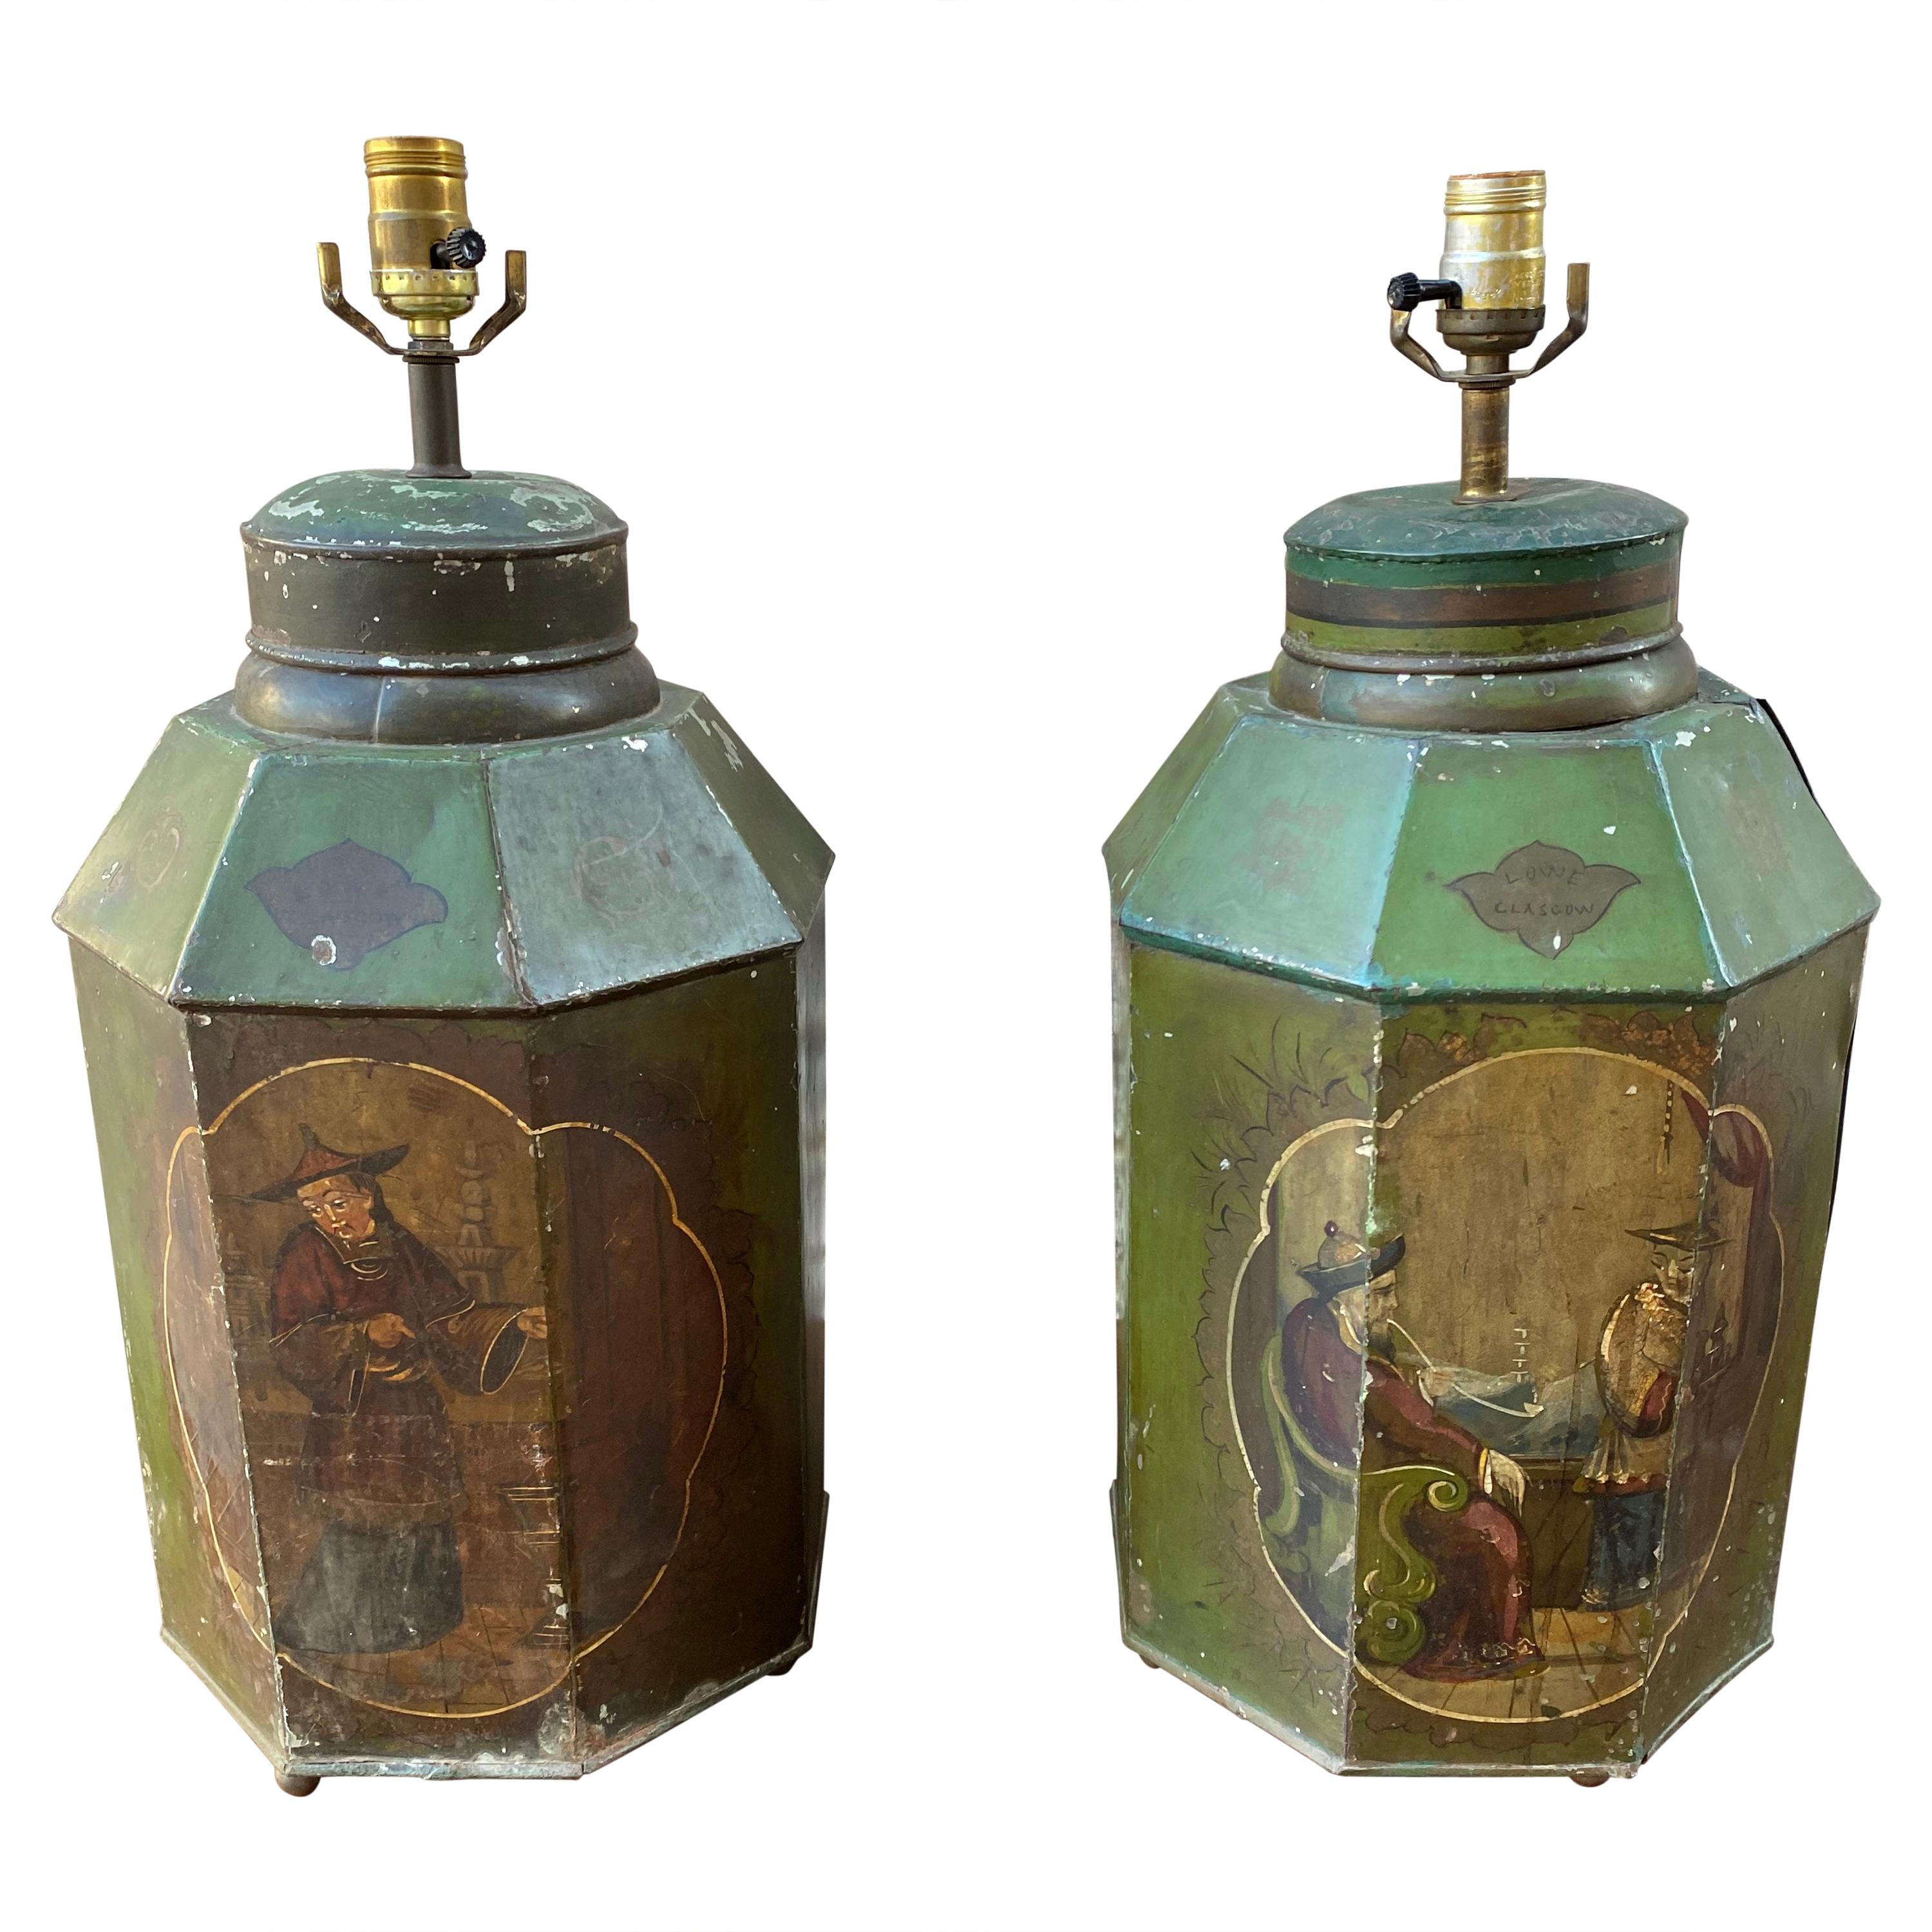 Early 19th Century Tea Bins in Original Green Paint with Decorative Paint